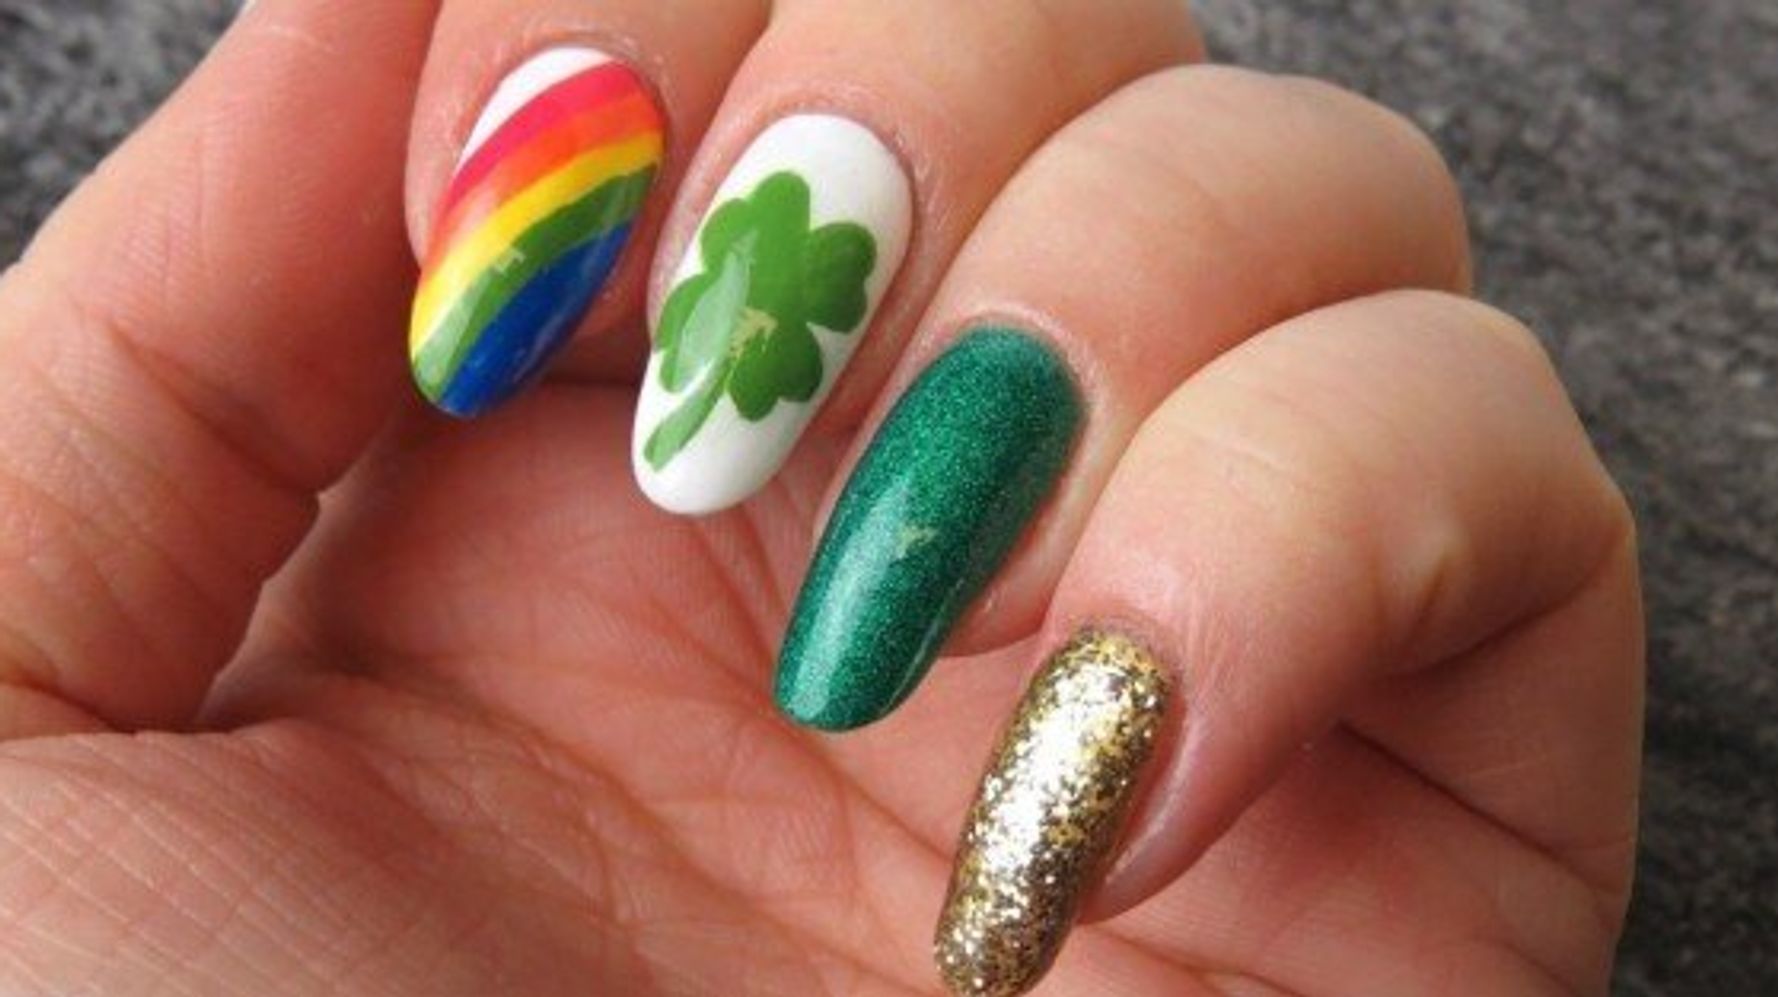 5. "Easy St. Patrick's Day Nail Designs" - wide 3